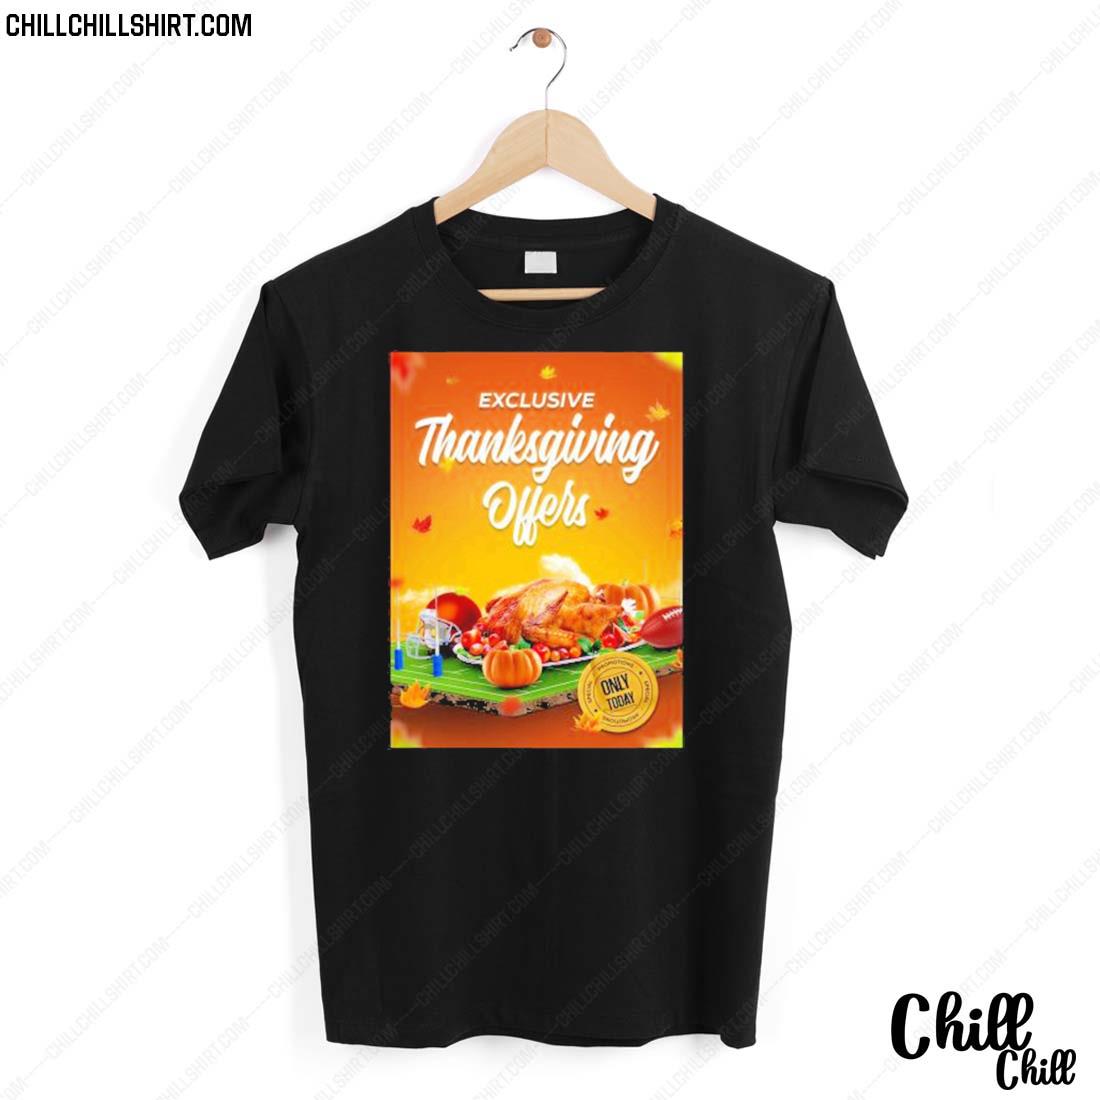 Official exclusive Thanksgiving Offers T-shirt